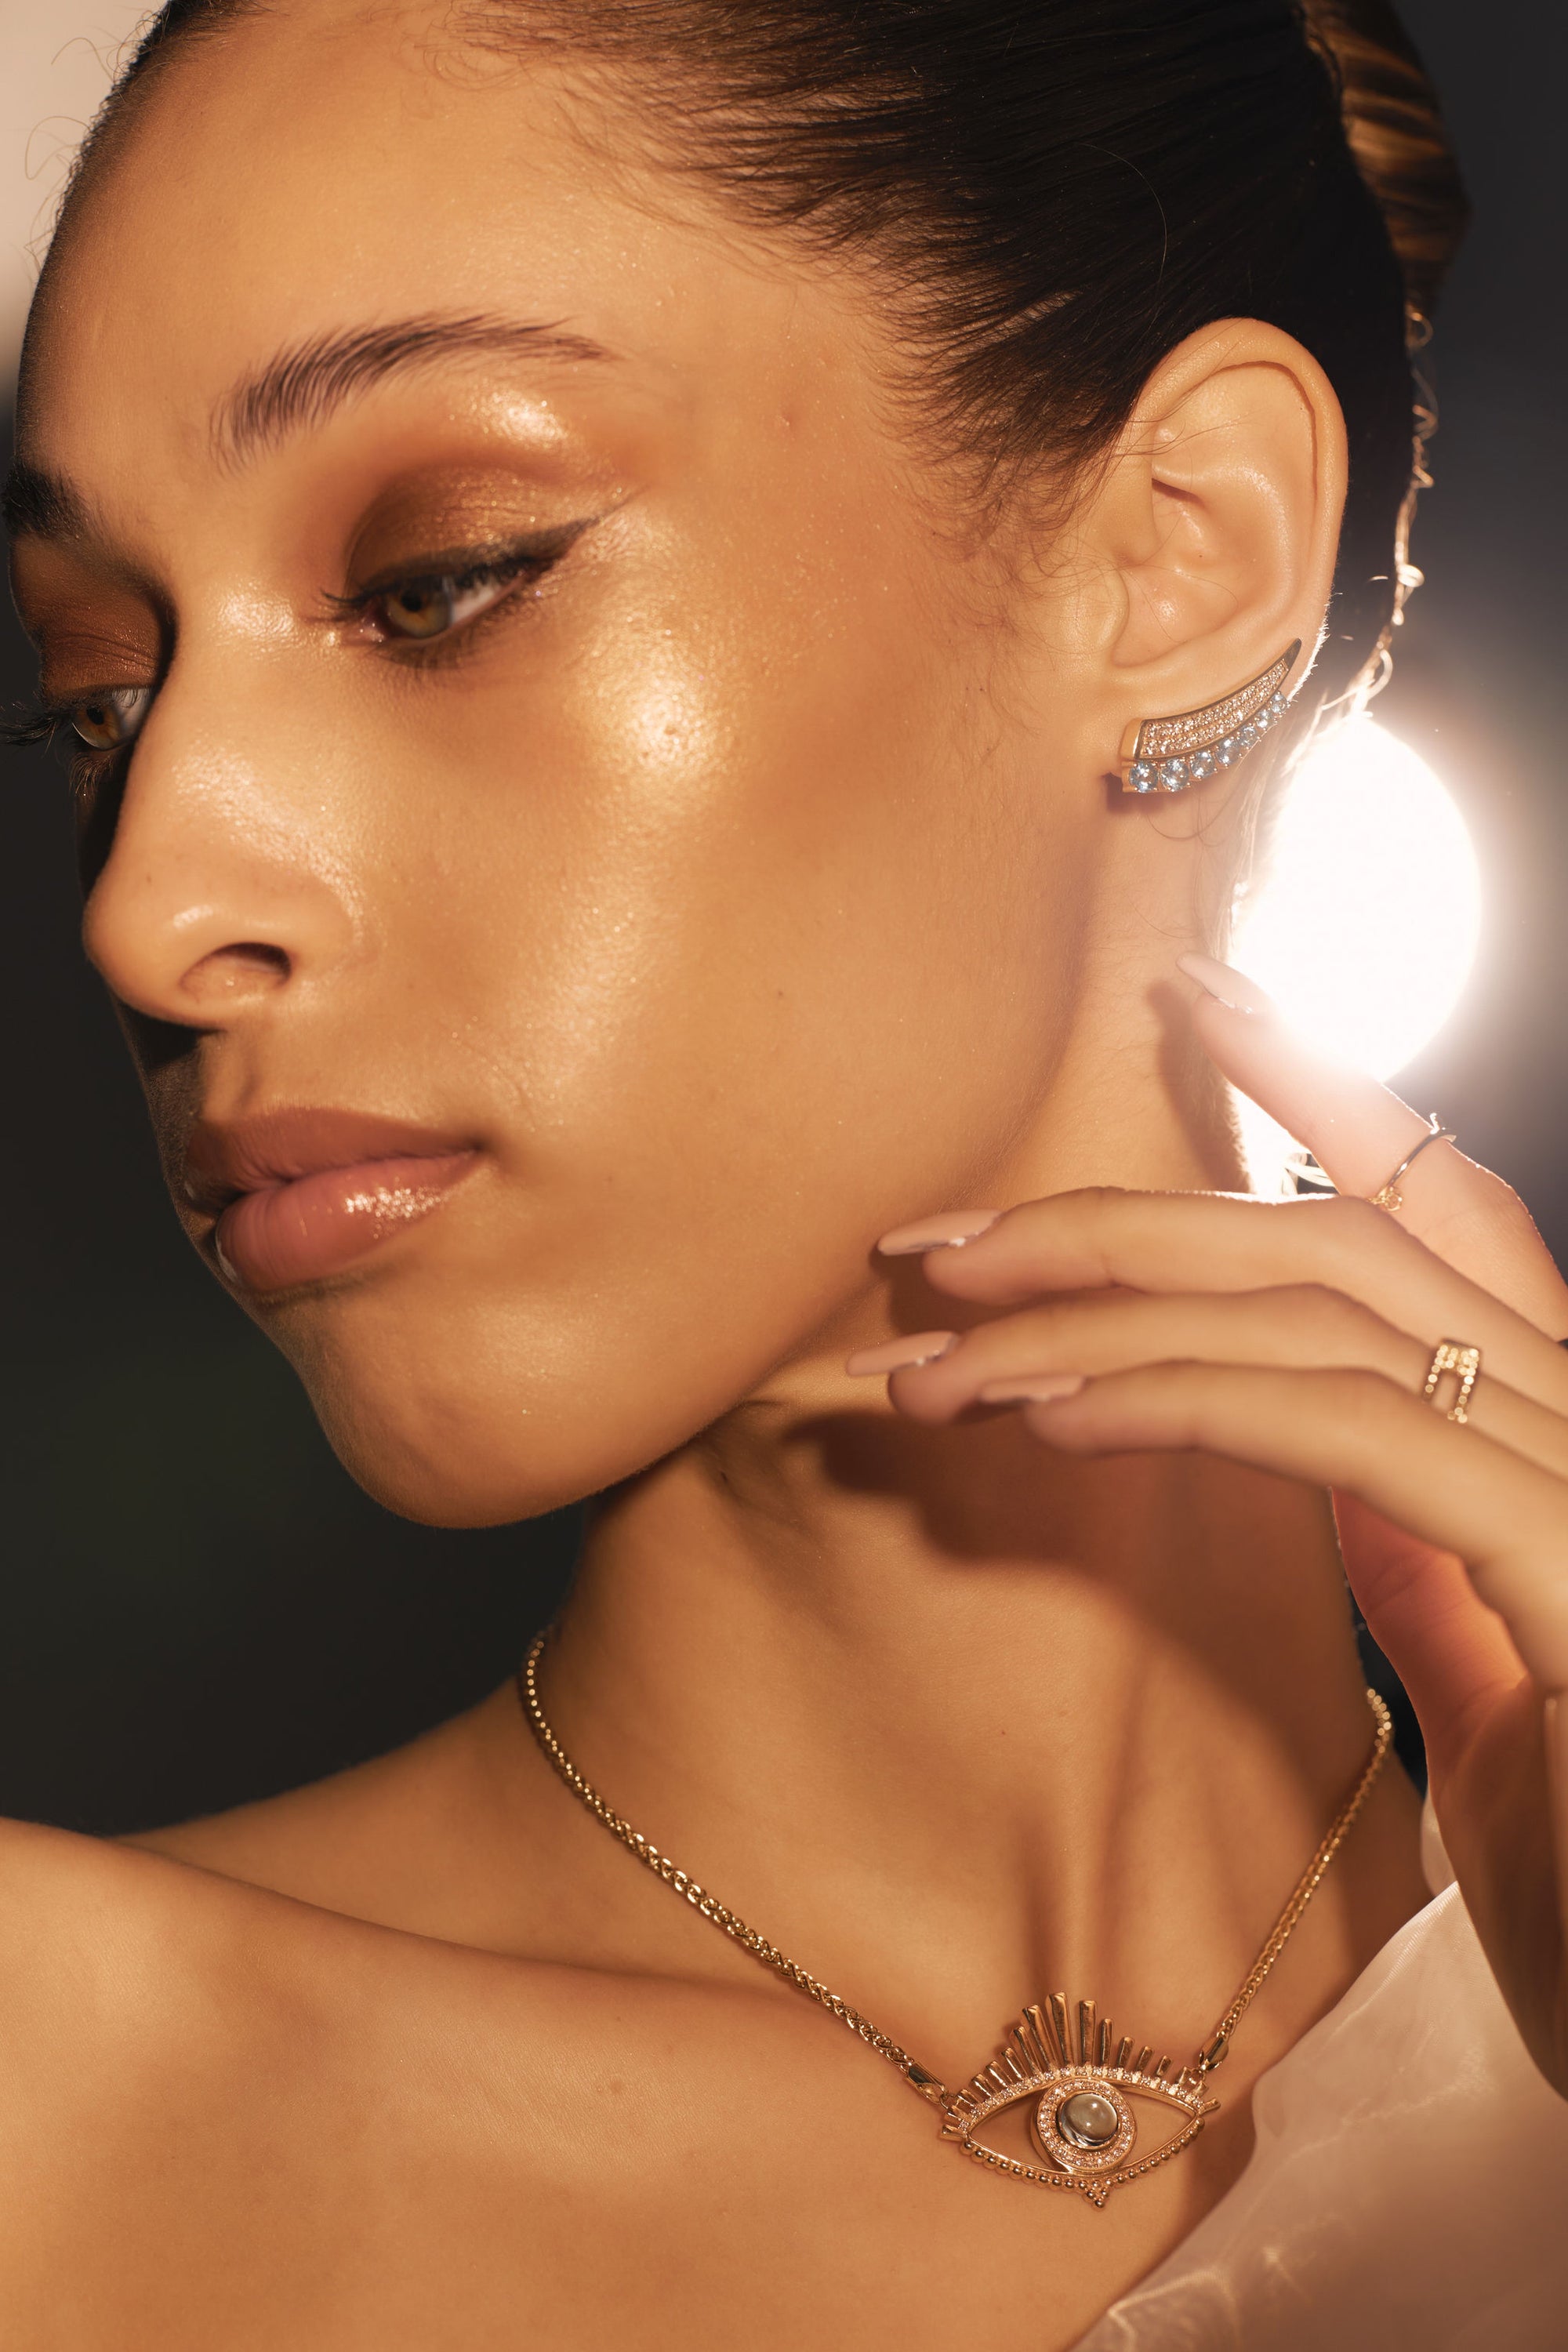 A woman with glowing skin wearing elegant makeup looks to the side, showcasing intricate yellow gold jewelry by Nijma M Fine Jewelry. She has The High Life - Blue Topaz and Diamond Yellow Gold Climber Earrings and a necklace with an eye motif. She lightly touches her ear with her manicured hand, revealing a ring featuring natural diamonds on her finger.